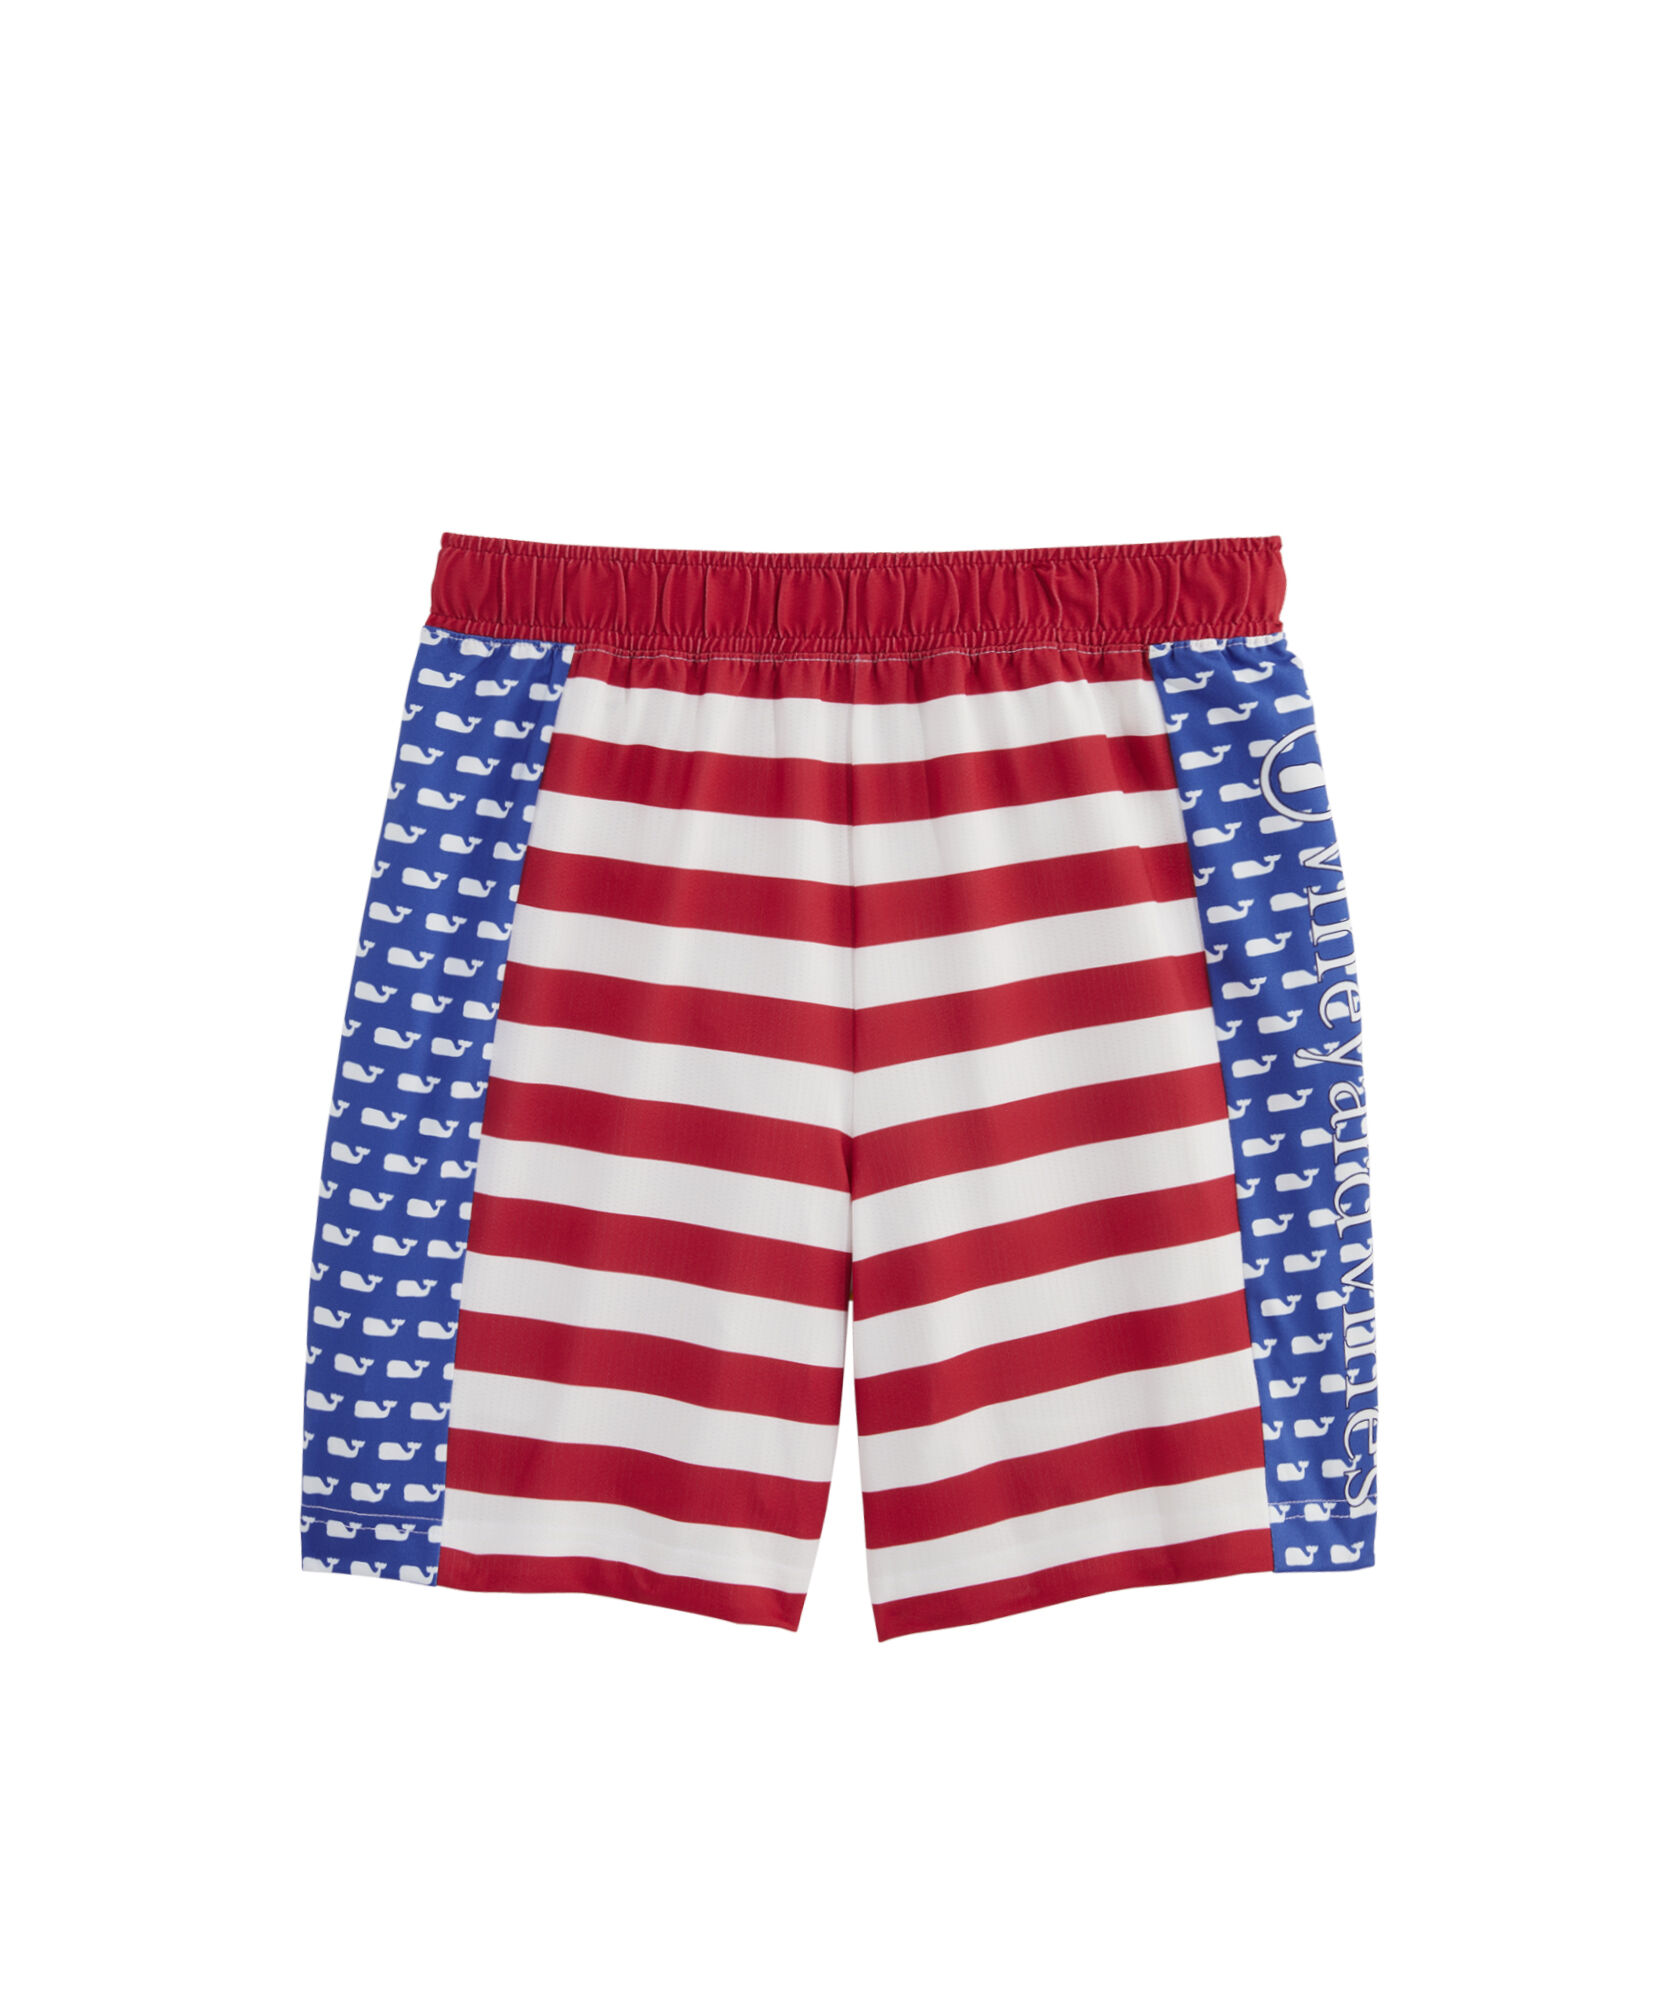 OUTLET Boys' Printed Lacrosse Shorts